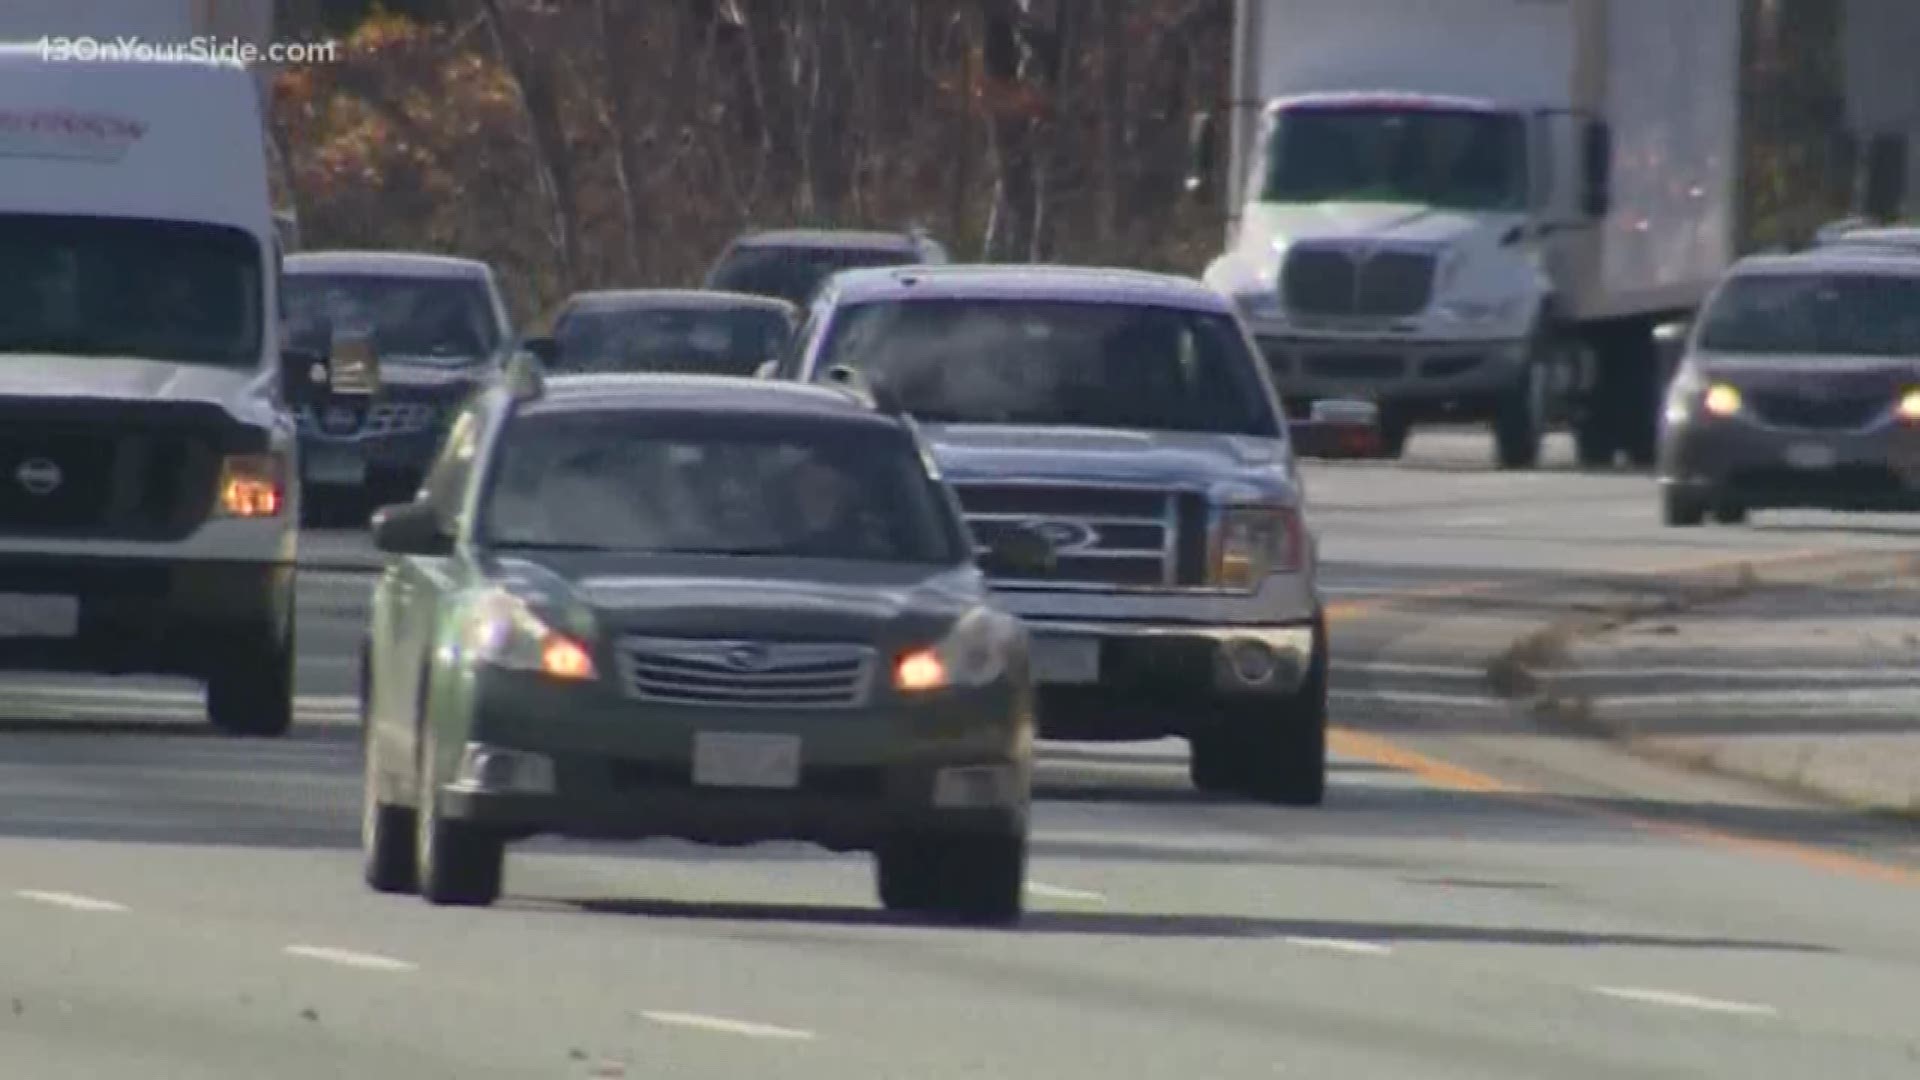 1.6 million people will be on the roads trying to get to their Thanksgiving destinations, AAA says.